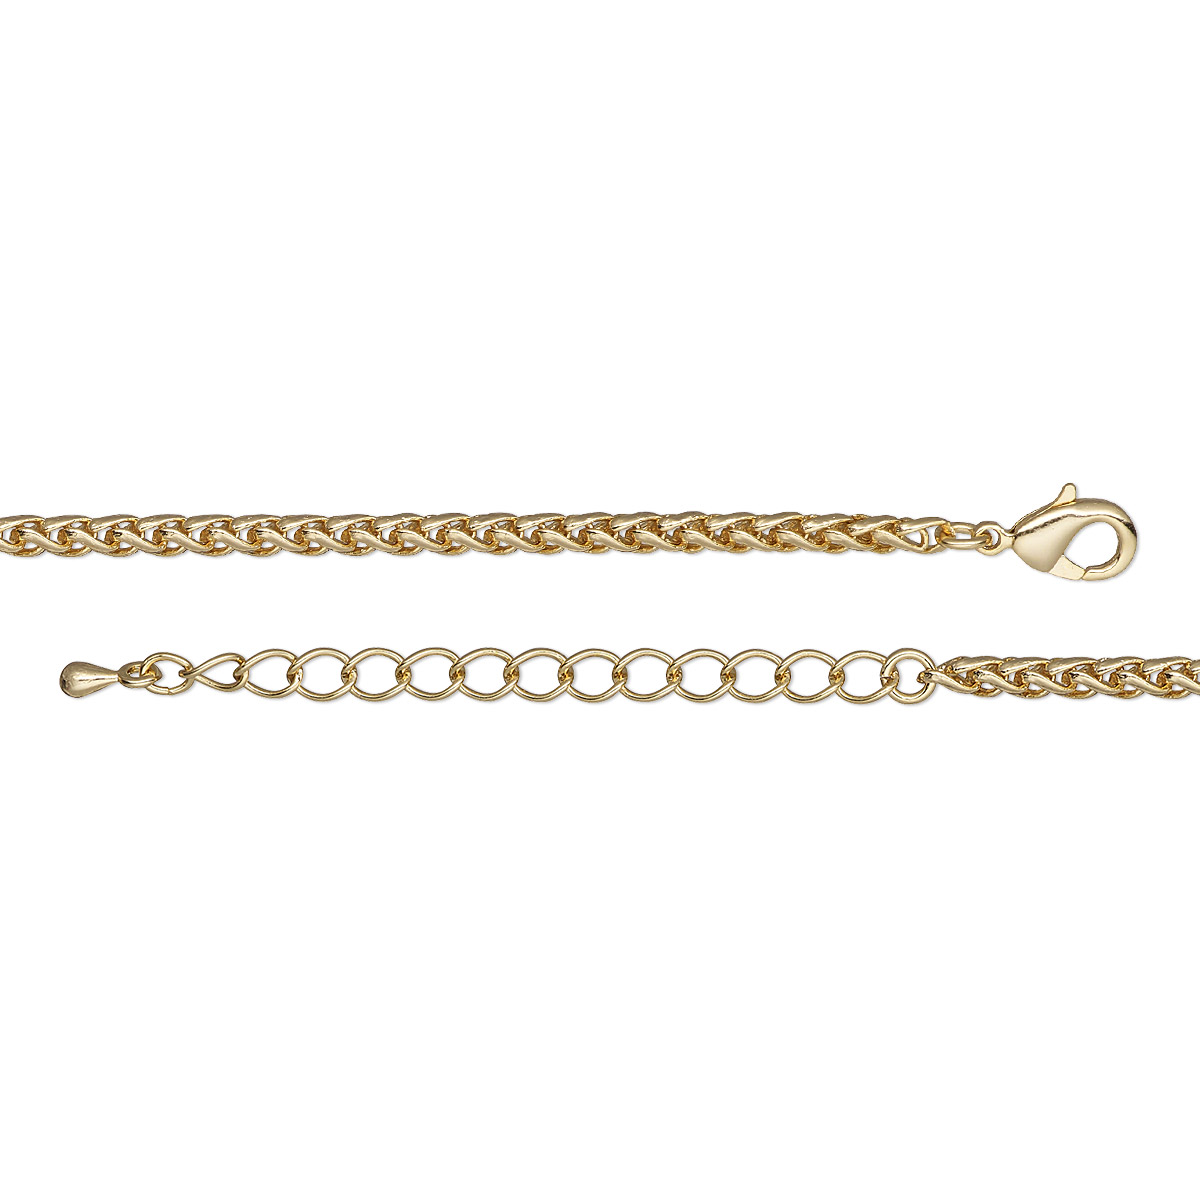 Chain, gold-finished brass, 3.2mm ponytail, 16 inches with 2-inch ...